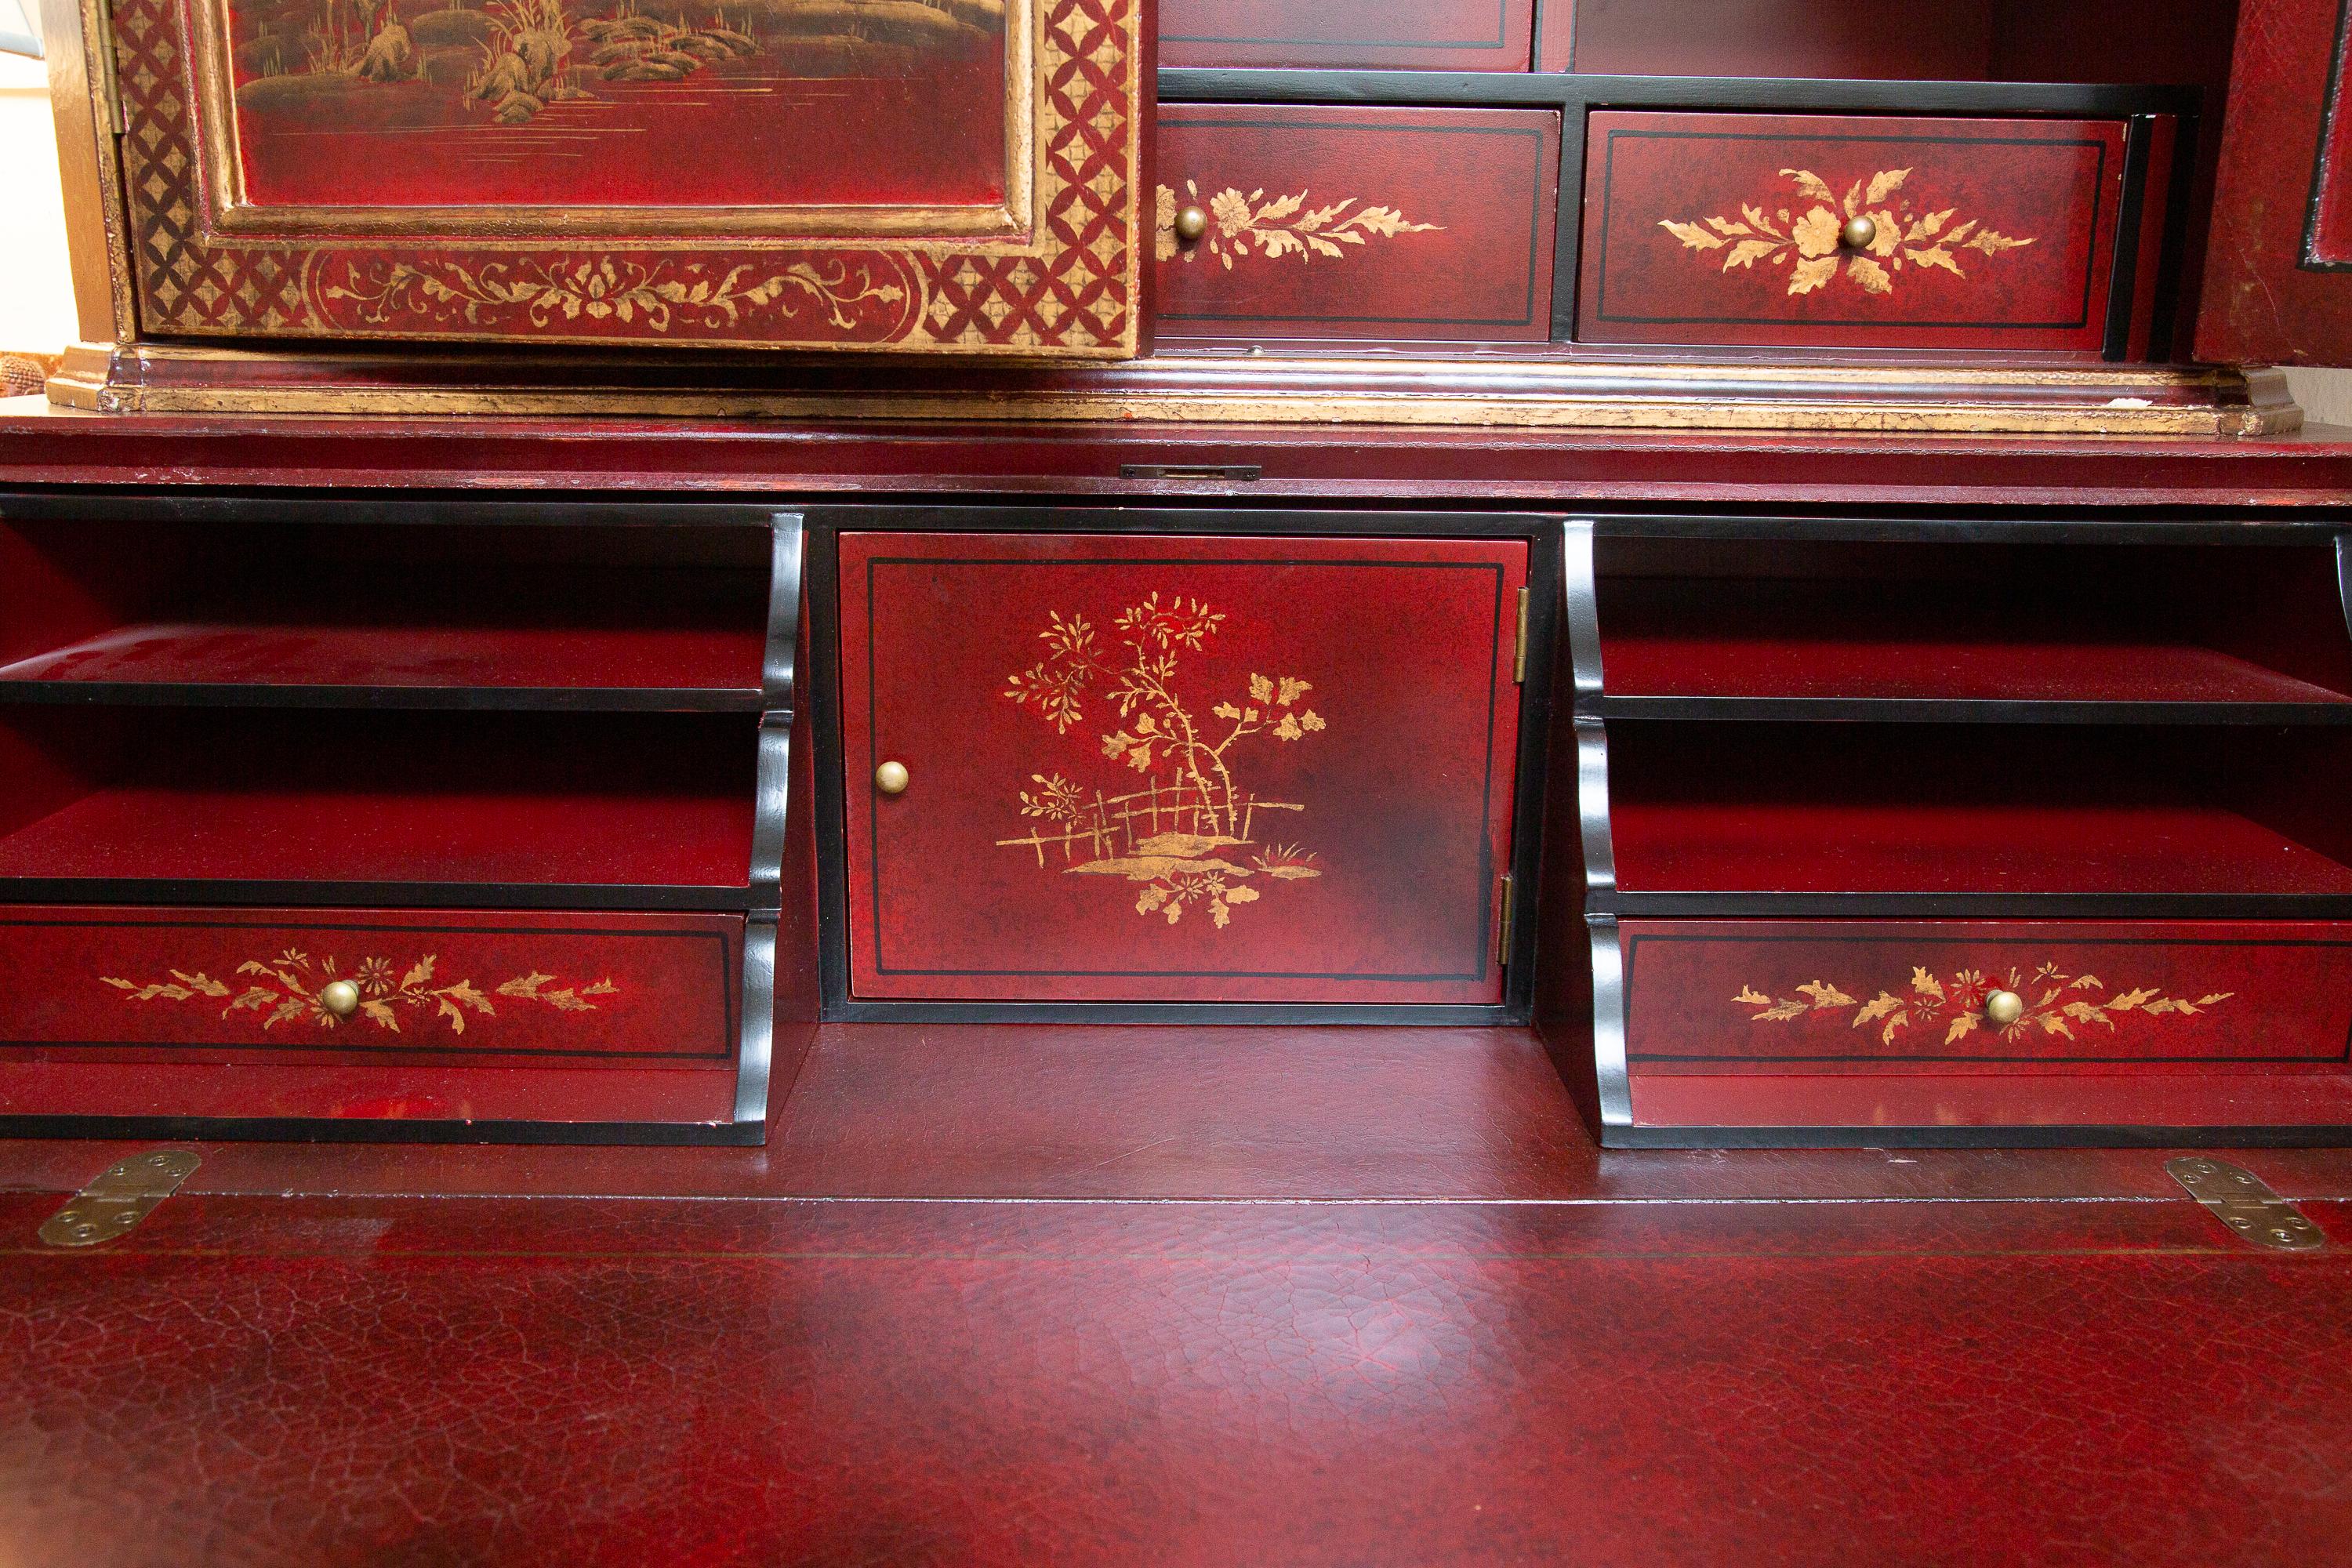 This is a highly decorative and stylish Chinese red painted bureau bookcase decorated overall with gilt chinoiseries. The top section contains a broken arched pediment over two conforming doors. The bottom section contains a drop-front writing